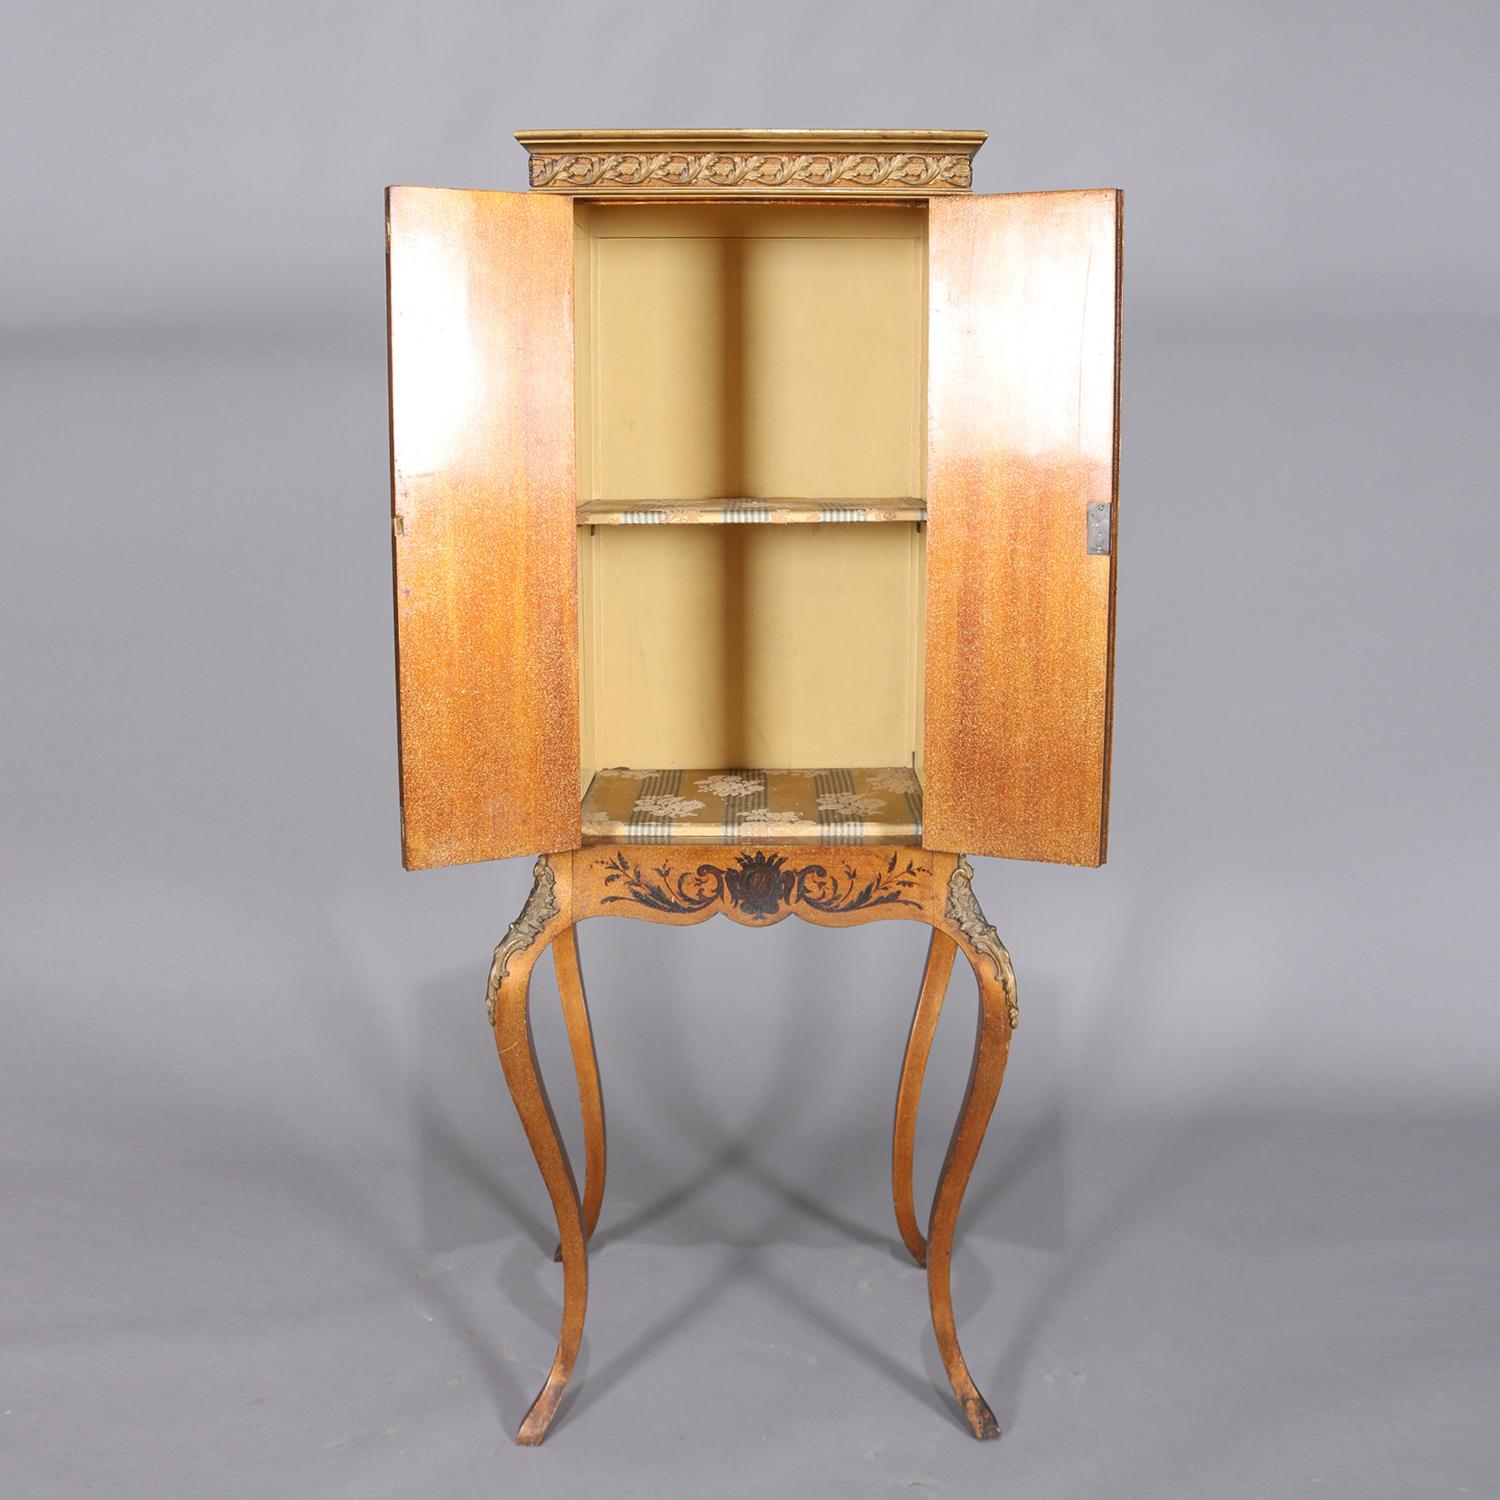 19th Century Antique French Vernis Martin Hand-Painted Giltwood Petite Cabinet, circa 1890